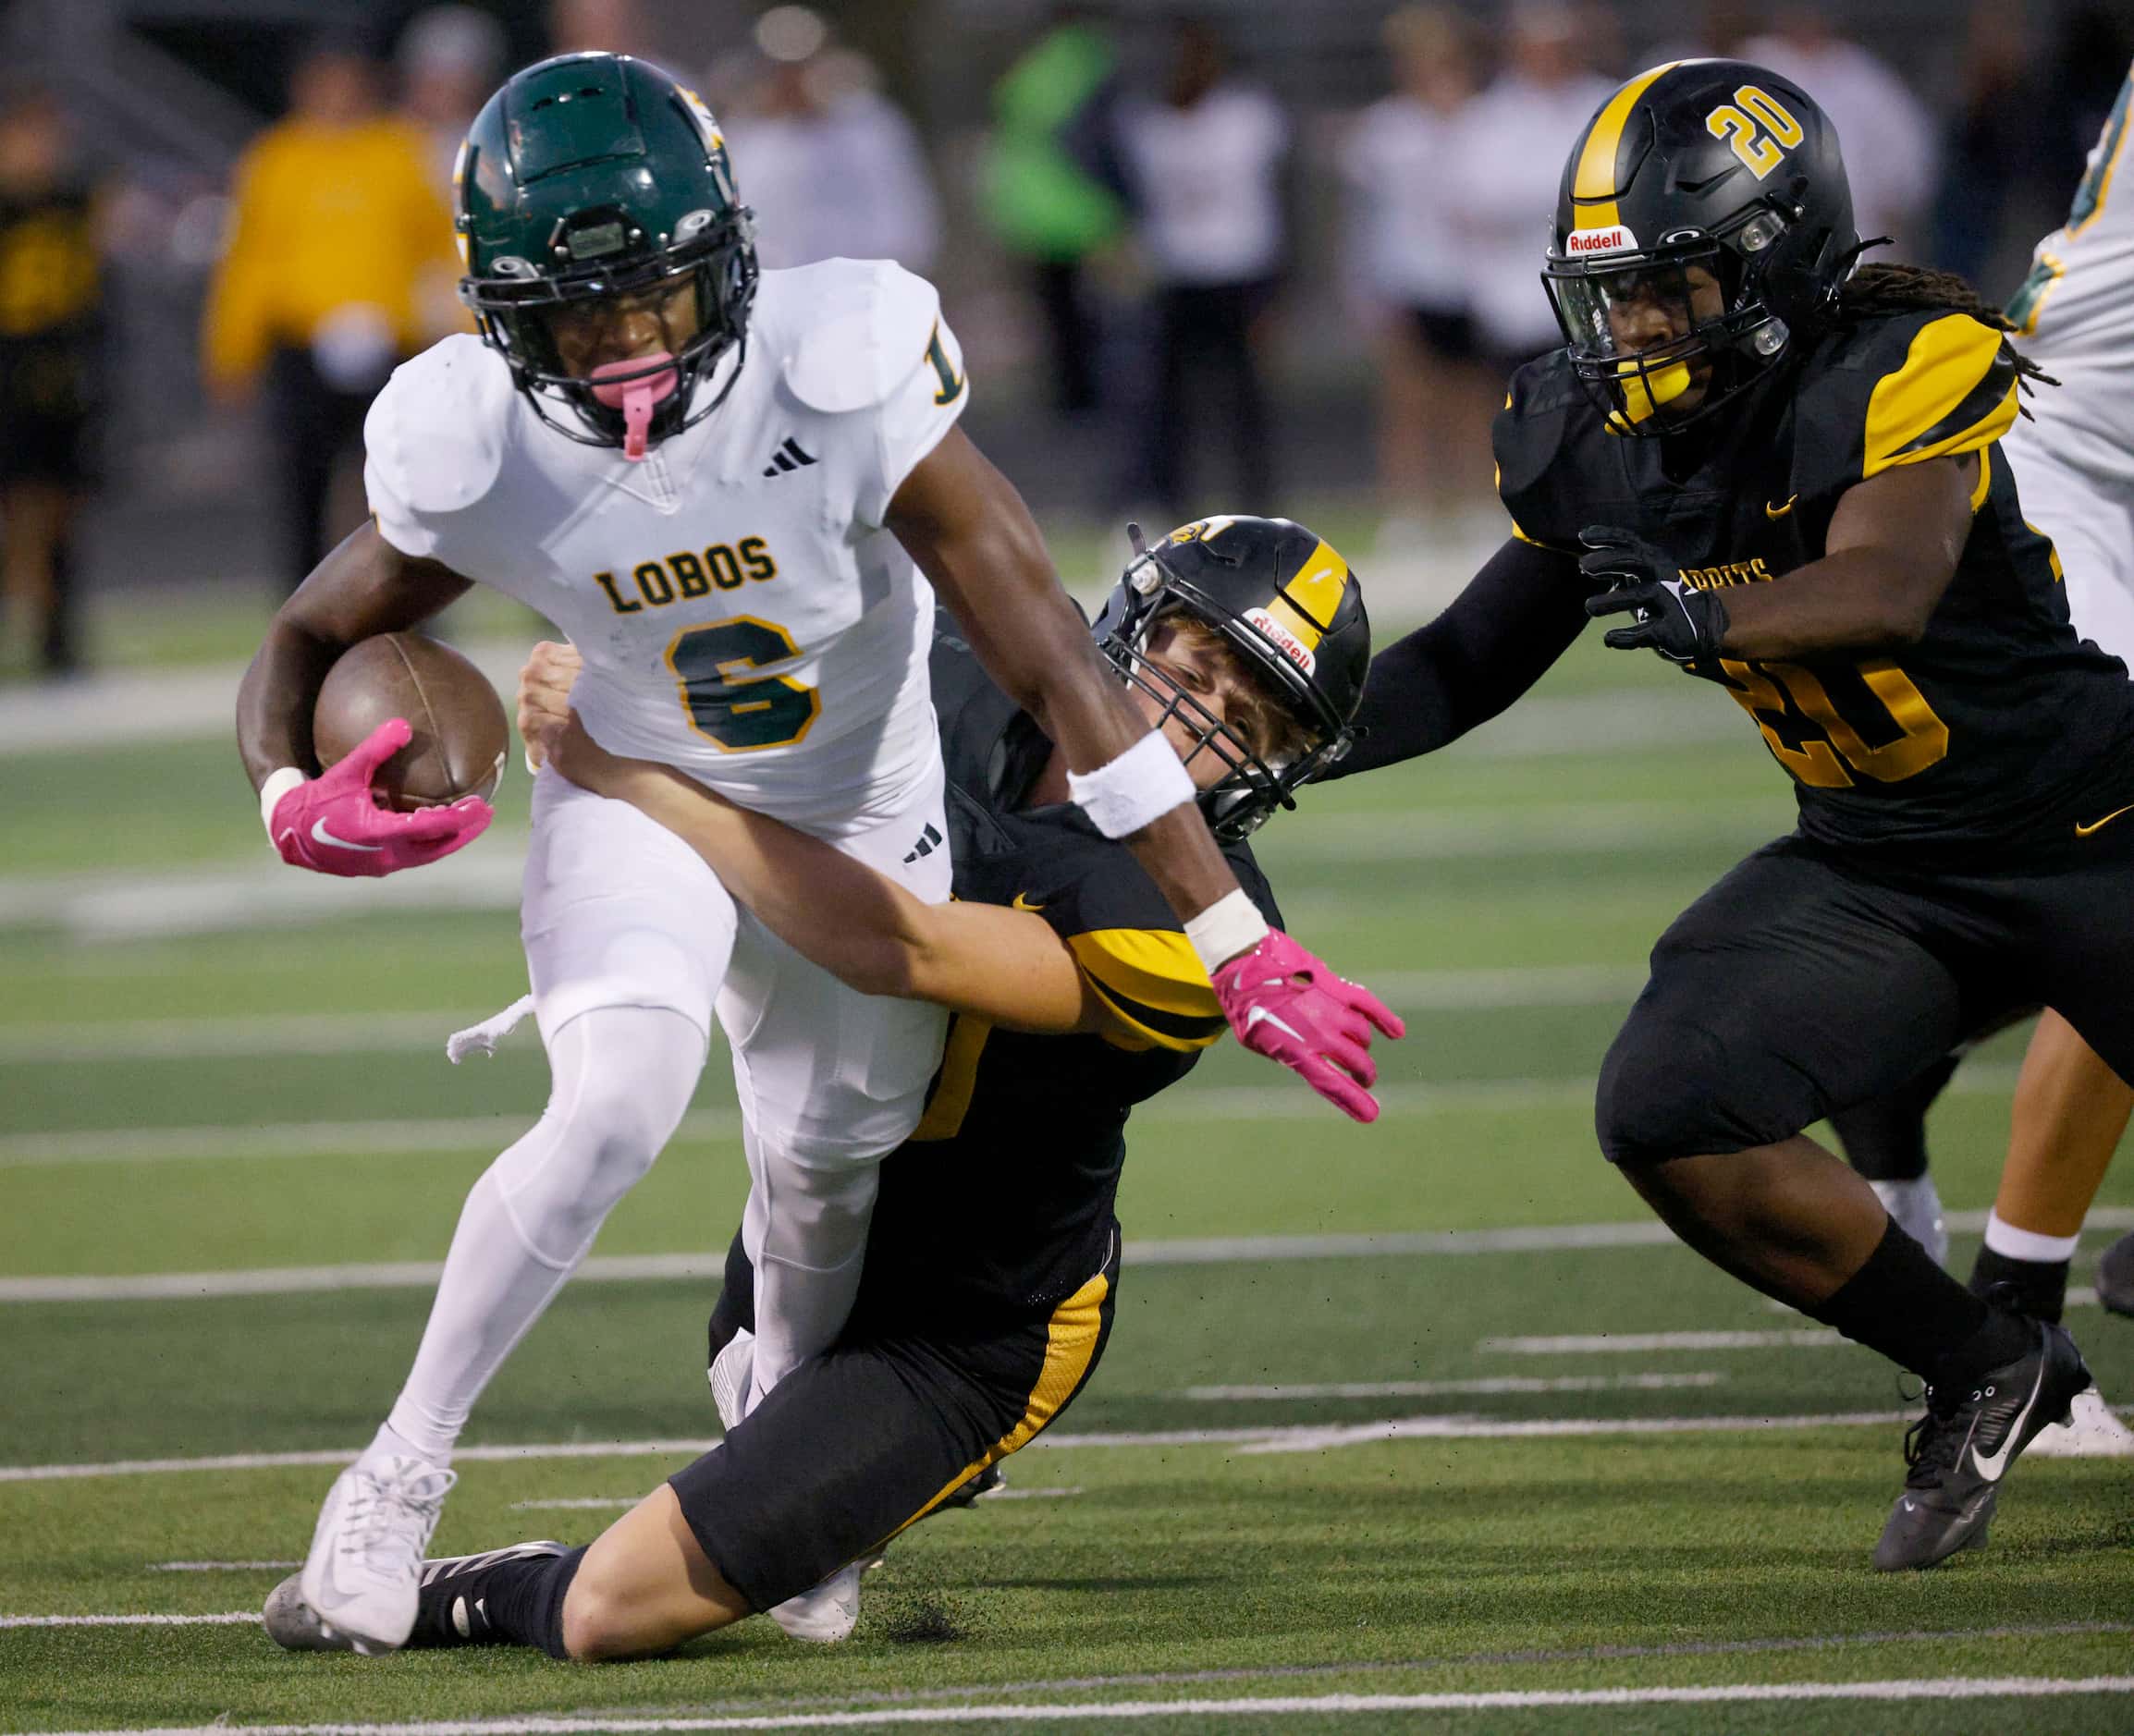 Longview's Willie Nelson (6) is tackled by Forney's Bryce Lott (30) as Forney's Xzavier...